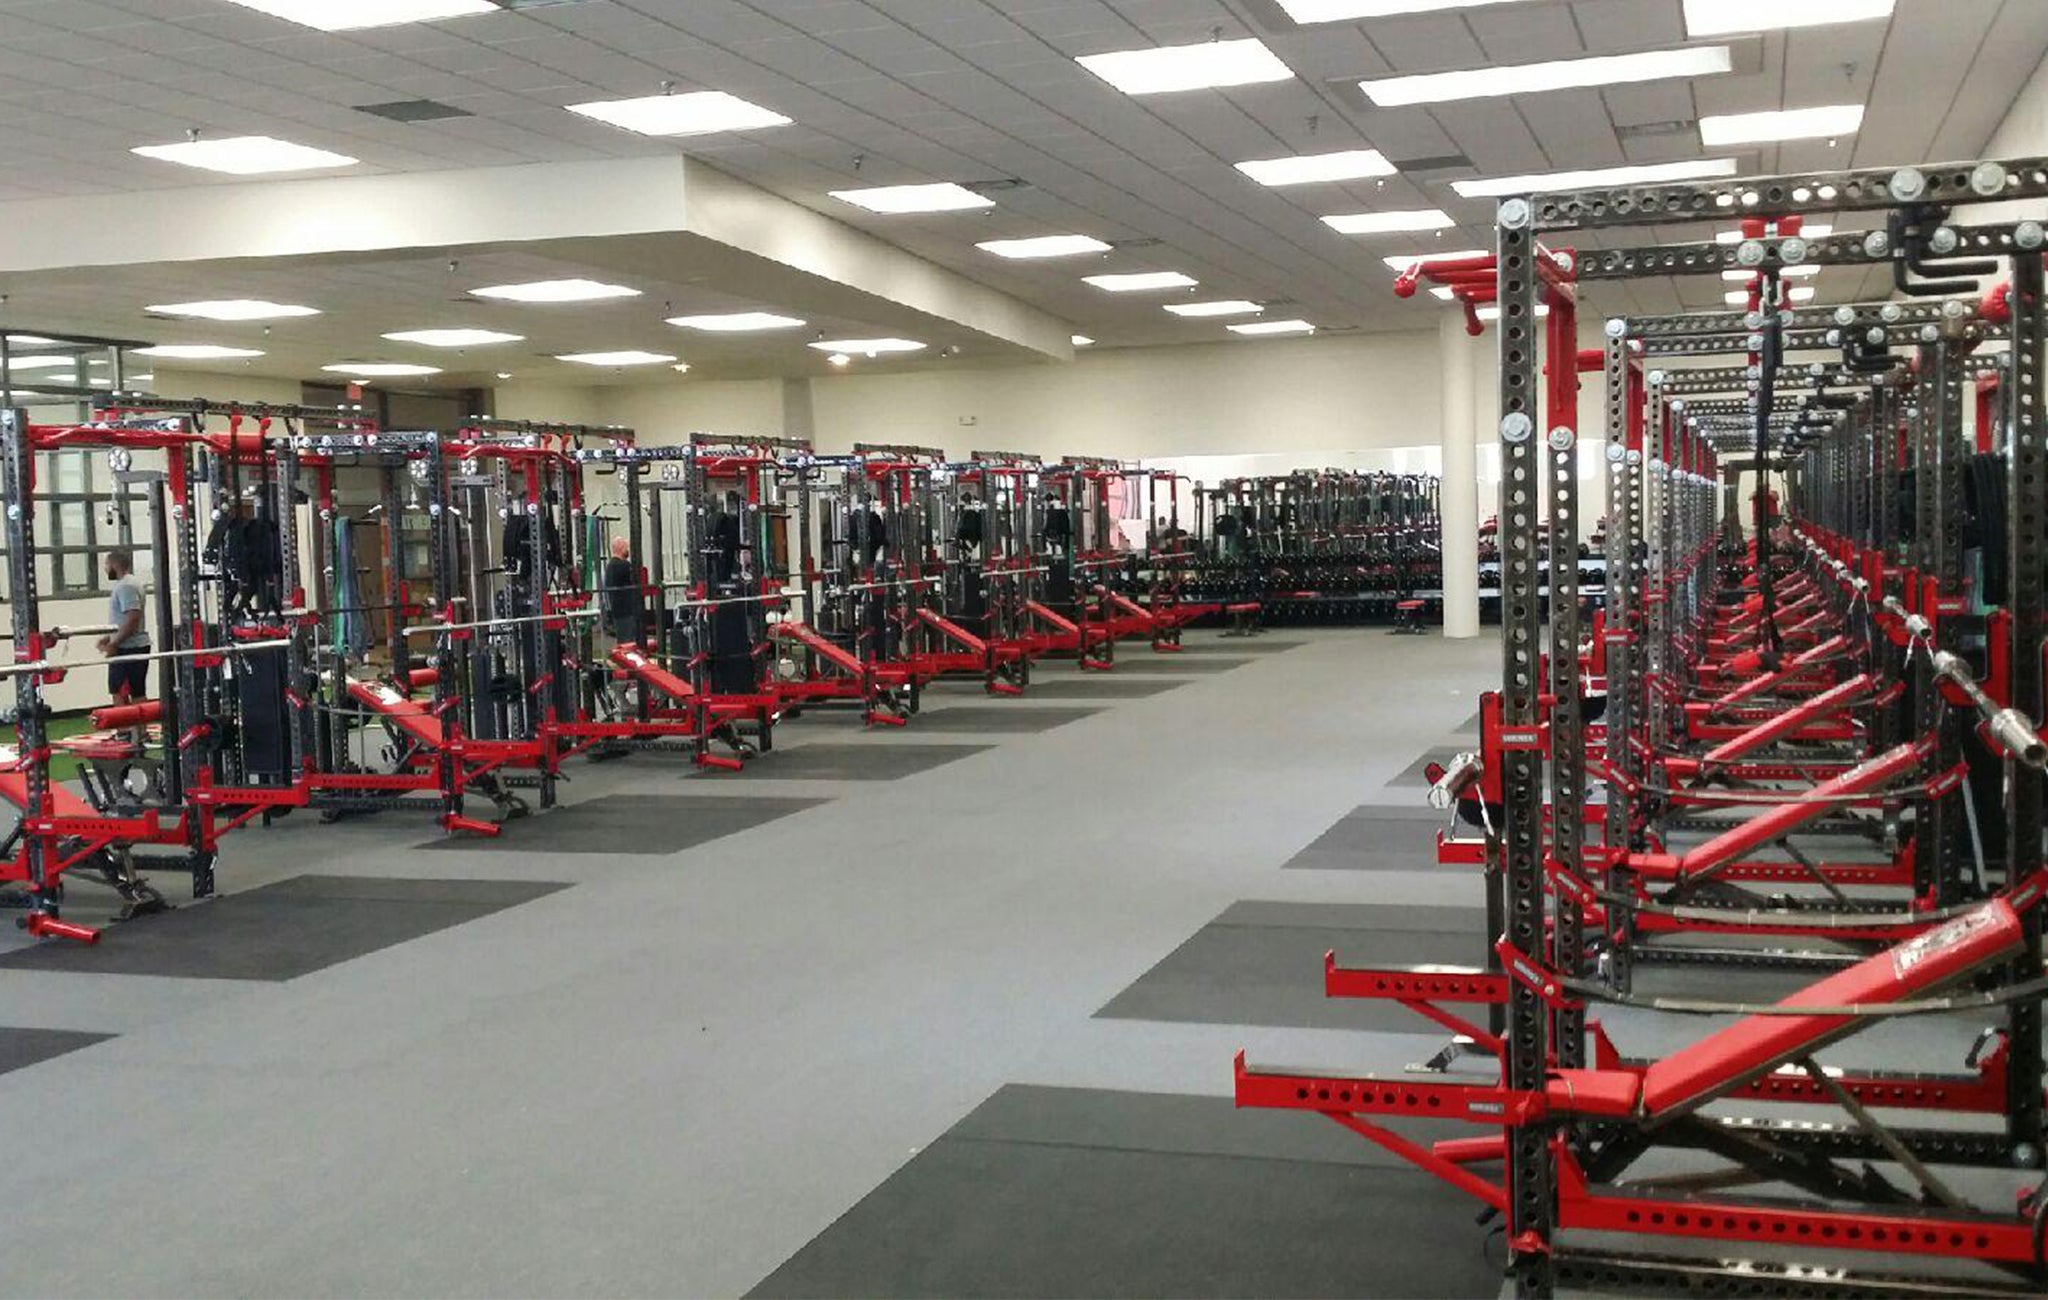 University of New Mexico Weight Room